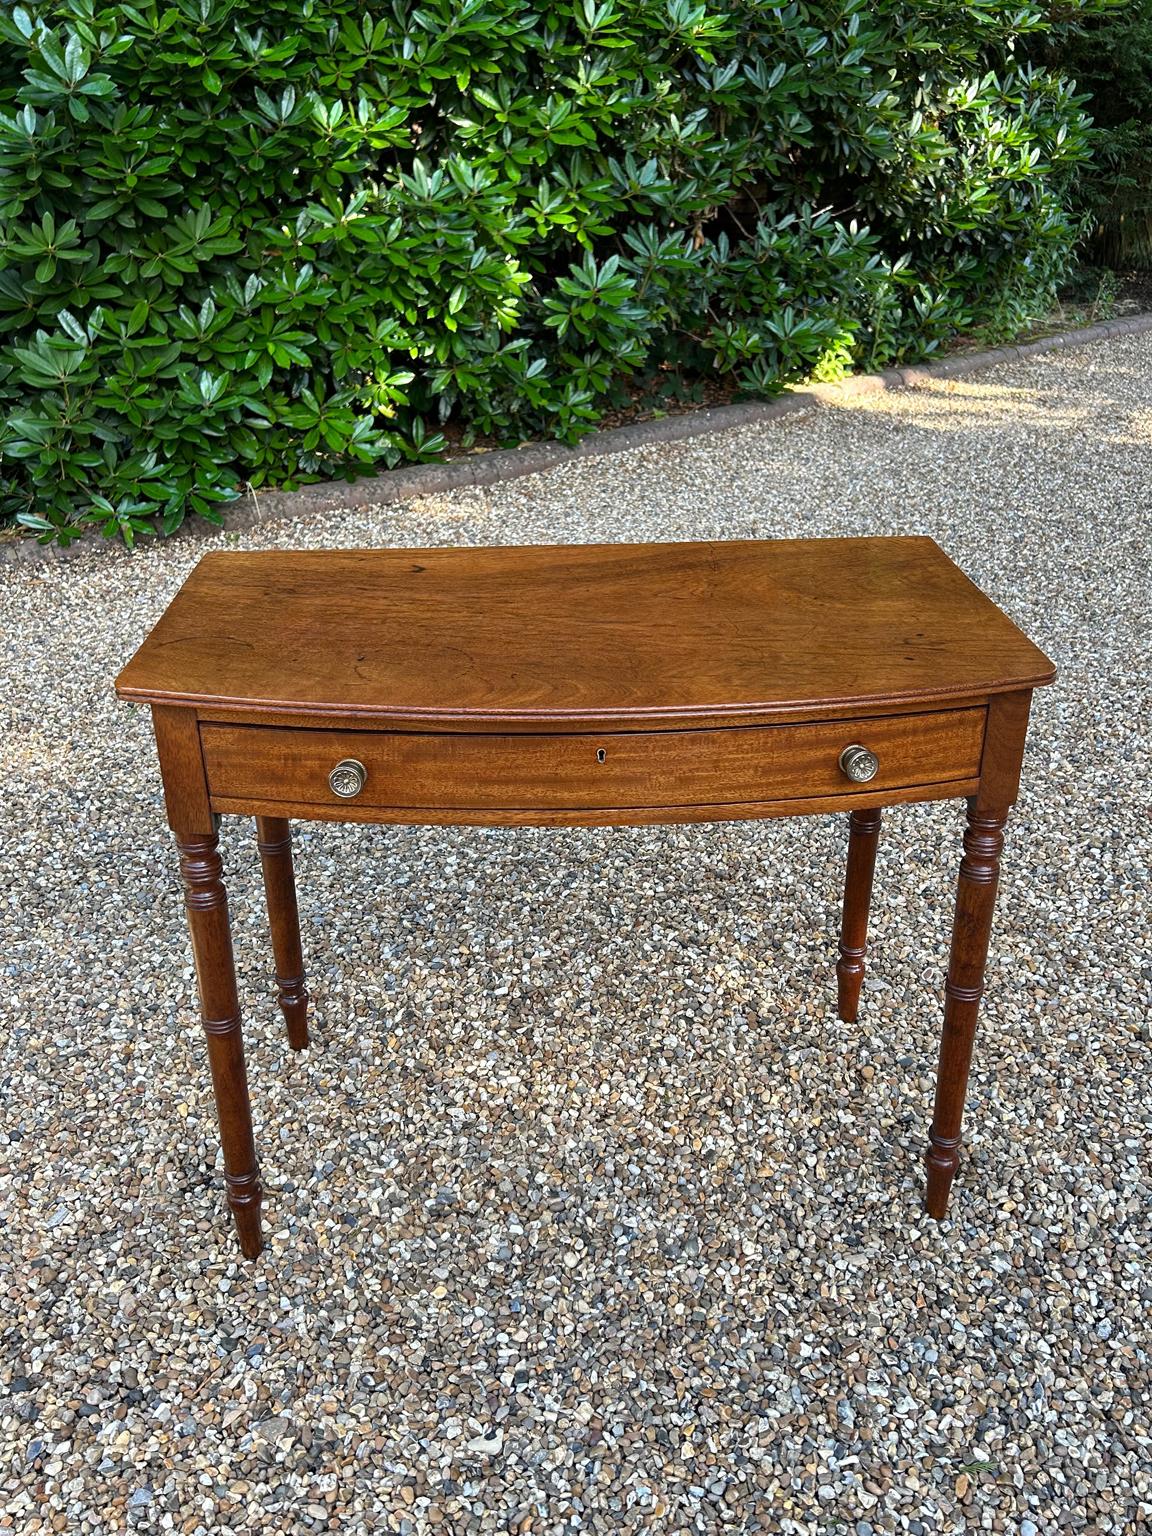 19th Century Georgian Mahogany Bow-Fronted Side Table with single mahogany drawer, round brass handles, on turned supports.

Circa: 1850

Dimensions:
Height:   28.5 inches –  72 cms
Width:    35 inches –  89 cms
Depth:   19.5 inches –  50